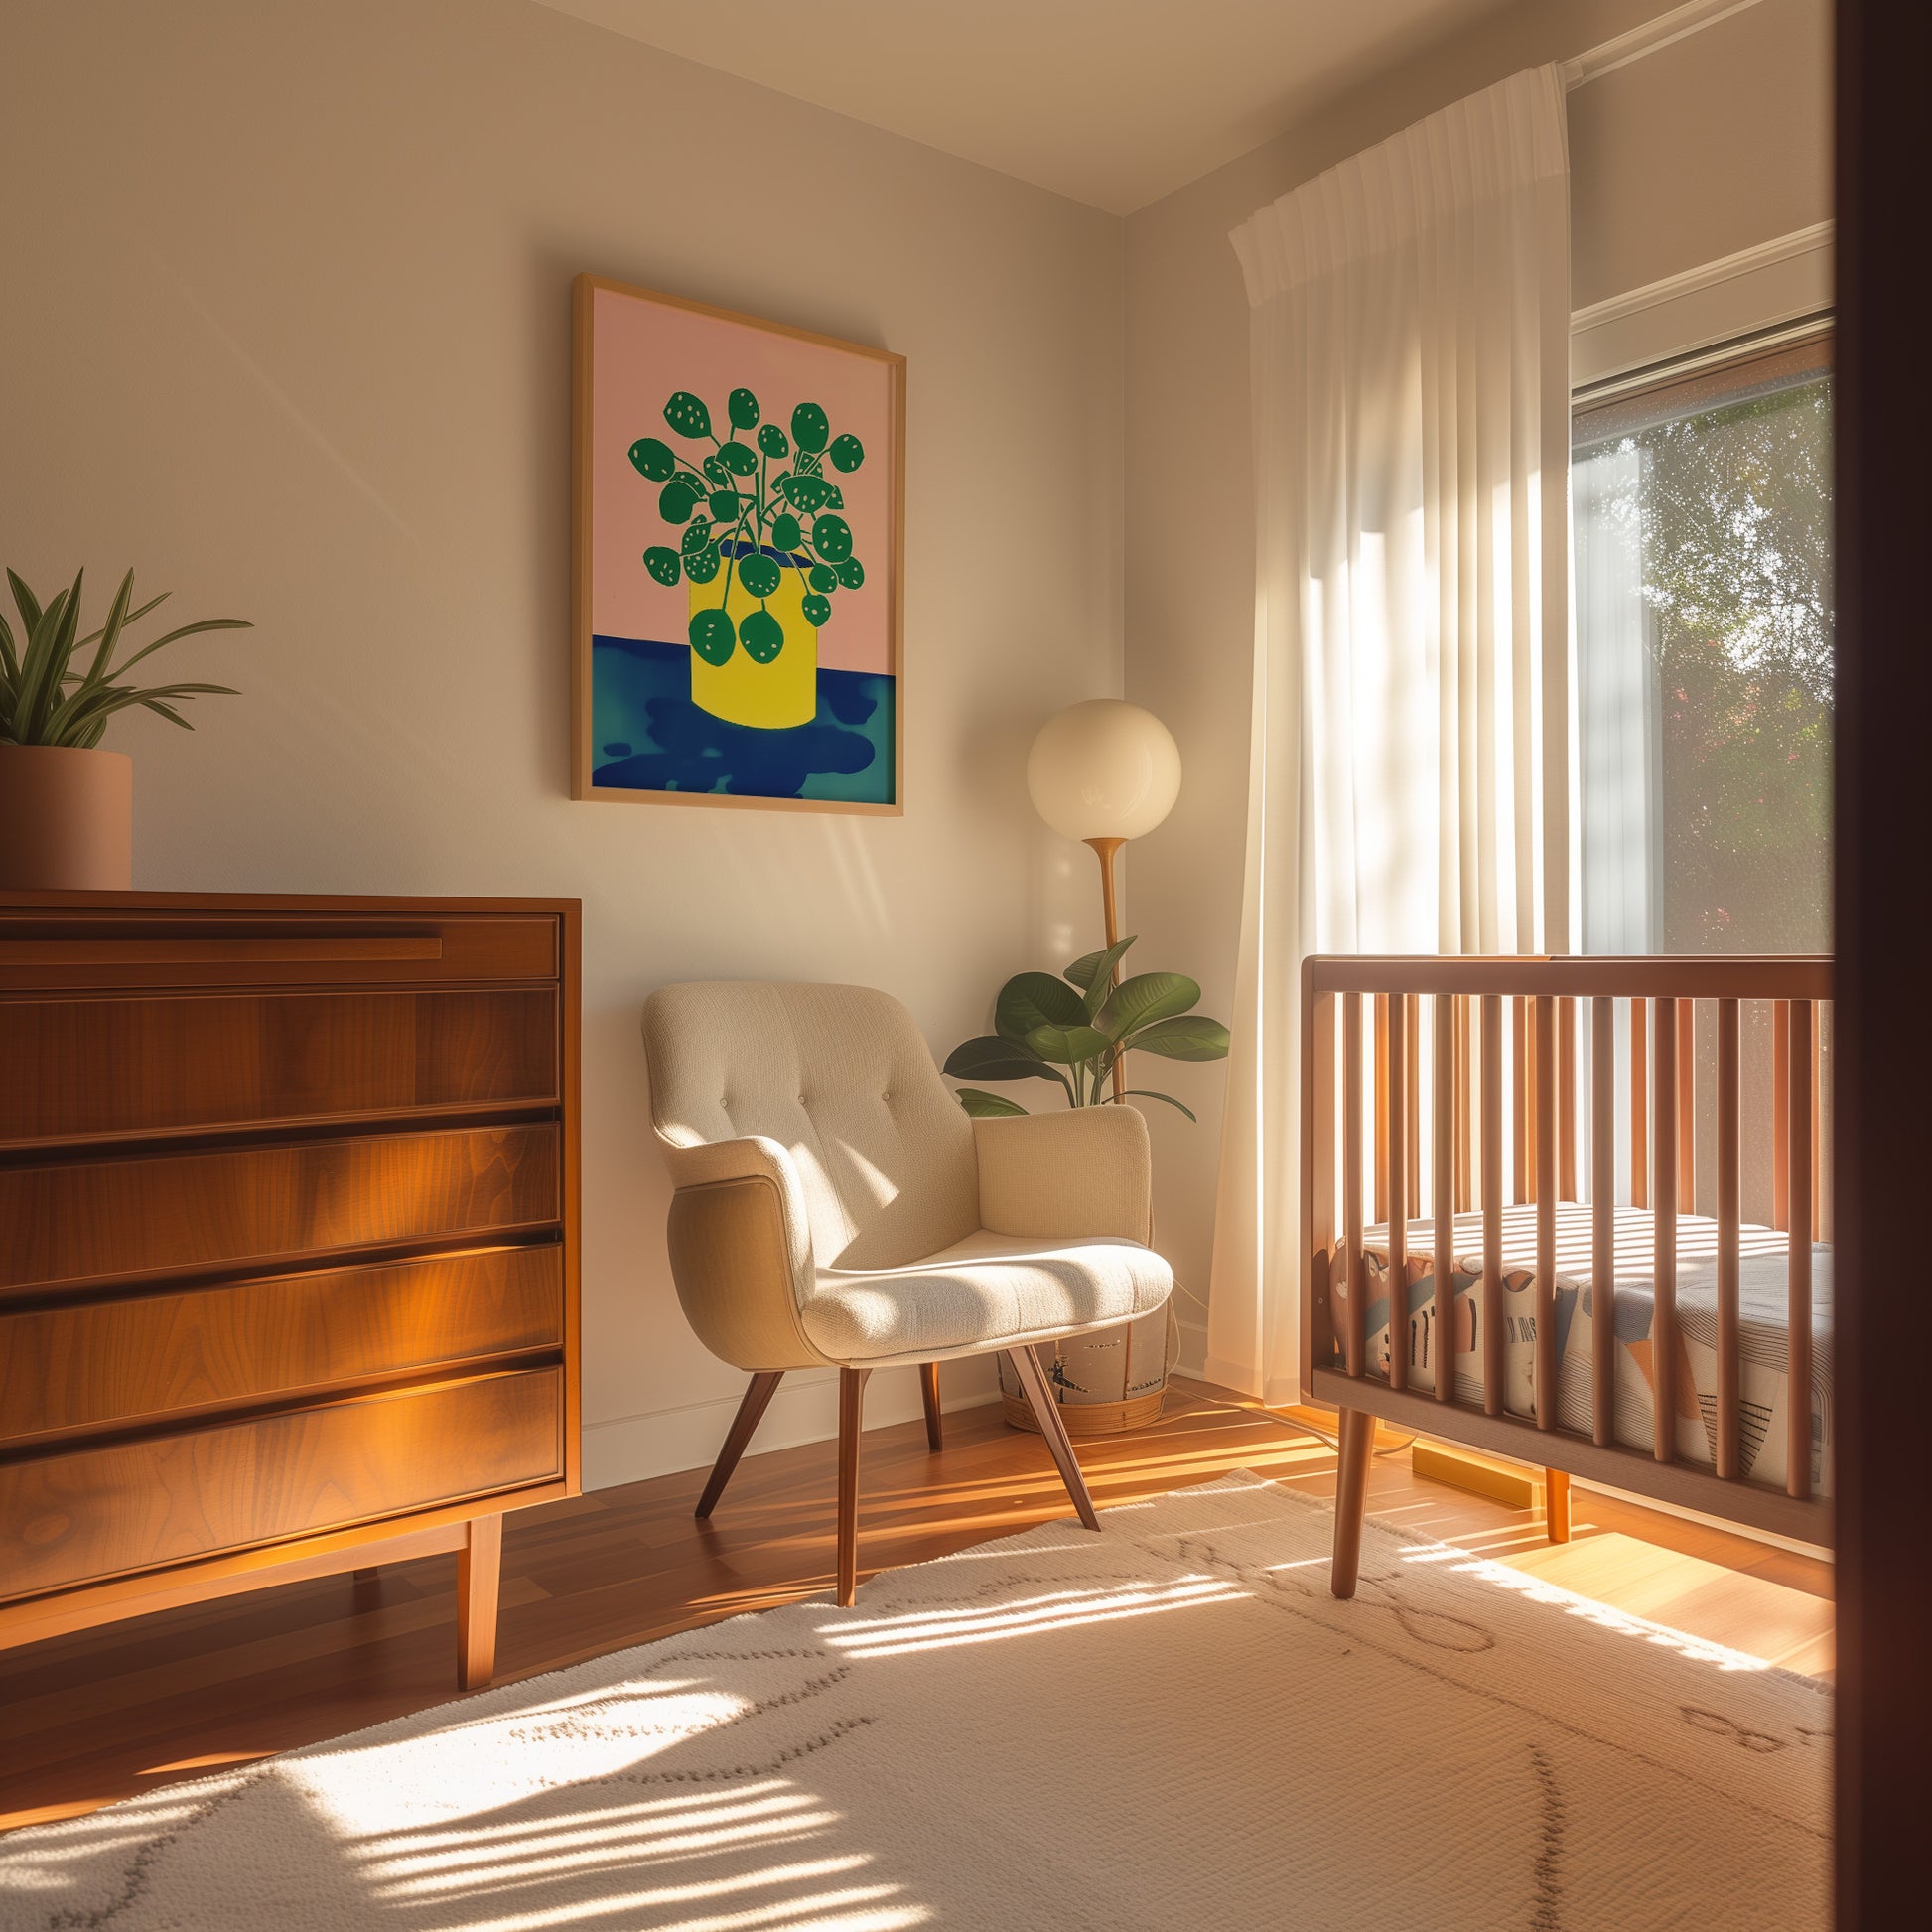 Cozy nursery room with a crib, armchair, and warm sunlight streaming in.